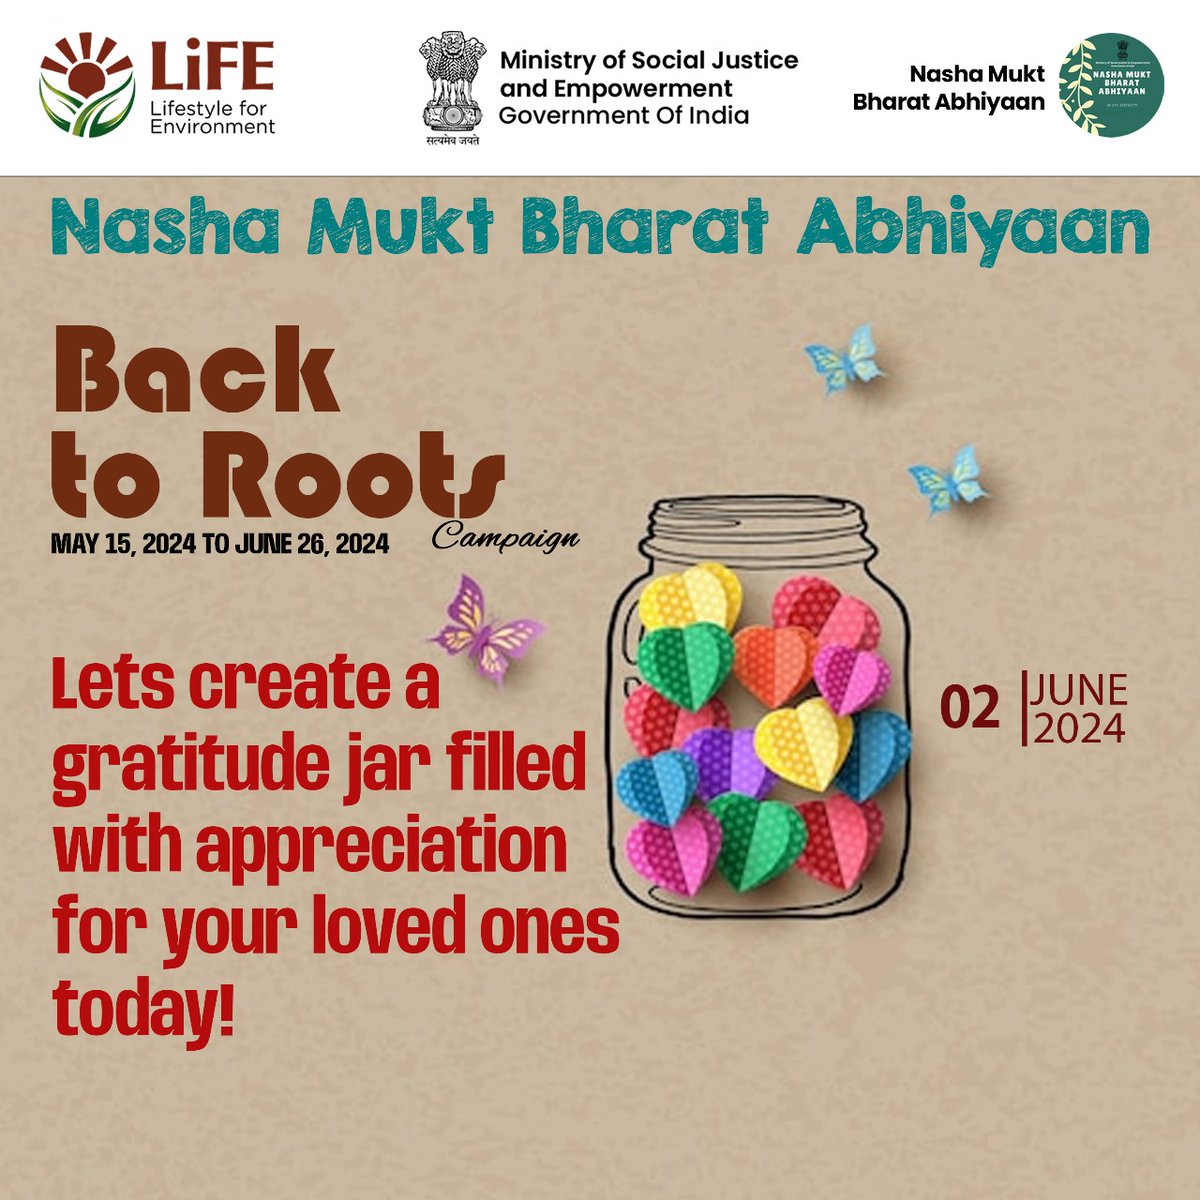 Nasha Mukt Bharat Abhiyaan brings 'Back to Roots Campaign' (15 May-26 June 2024) A gratitude jar filled with love and compassion for our loved ones. @Drvirendrakum13 @MSJEGOI @HMOIndia @_saurabhgarg @SMILE_MoSJE @UNODC @NITIAayog #nmba #drugfreeindia